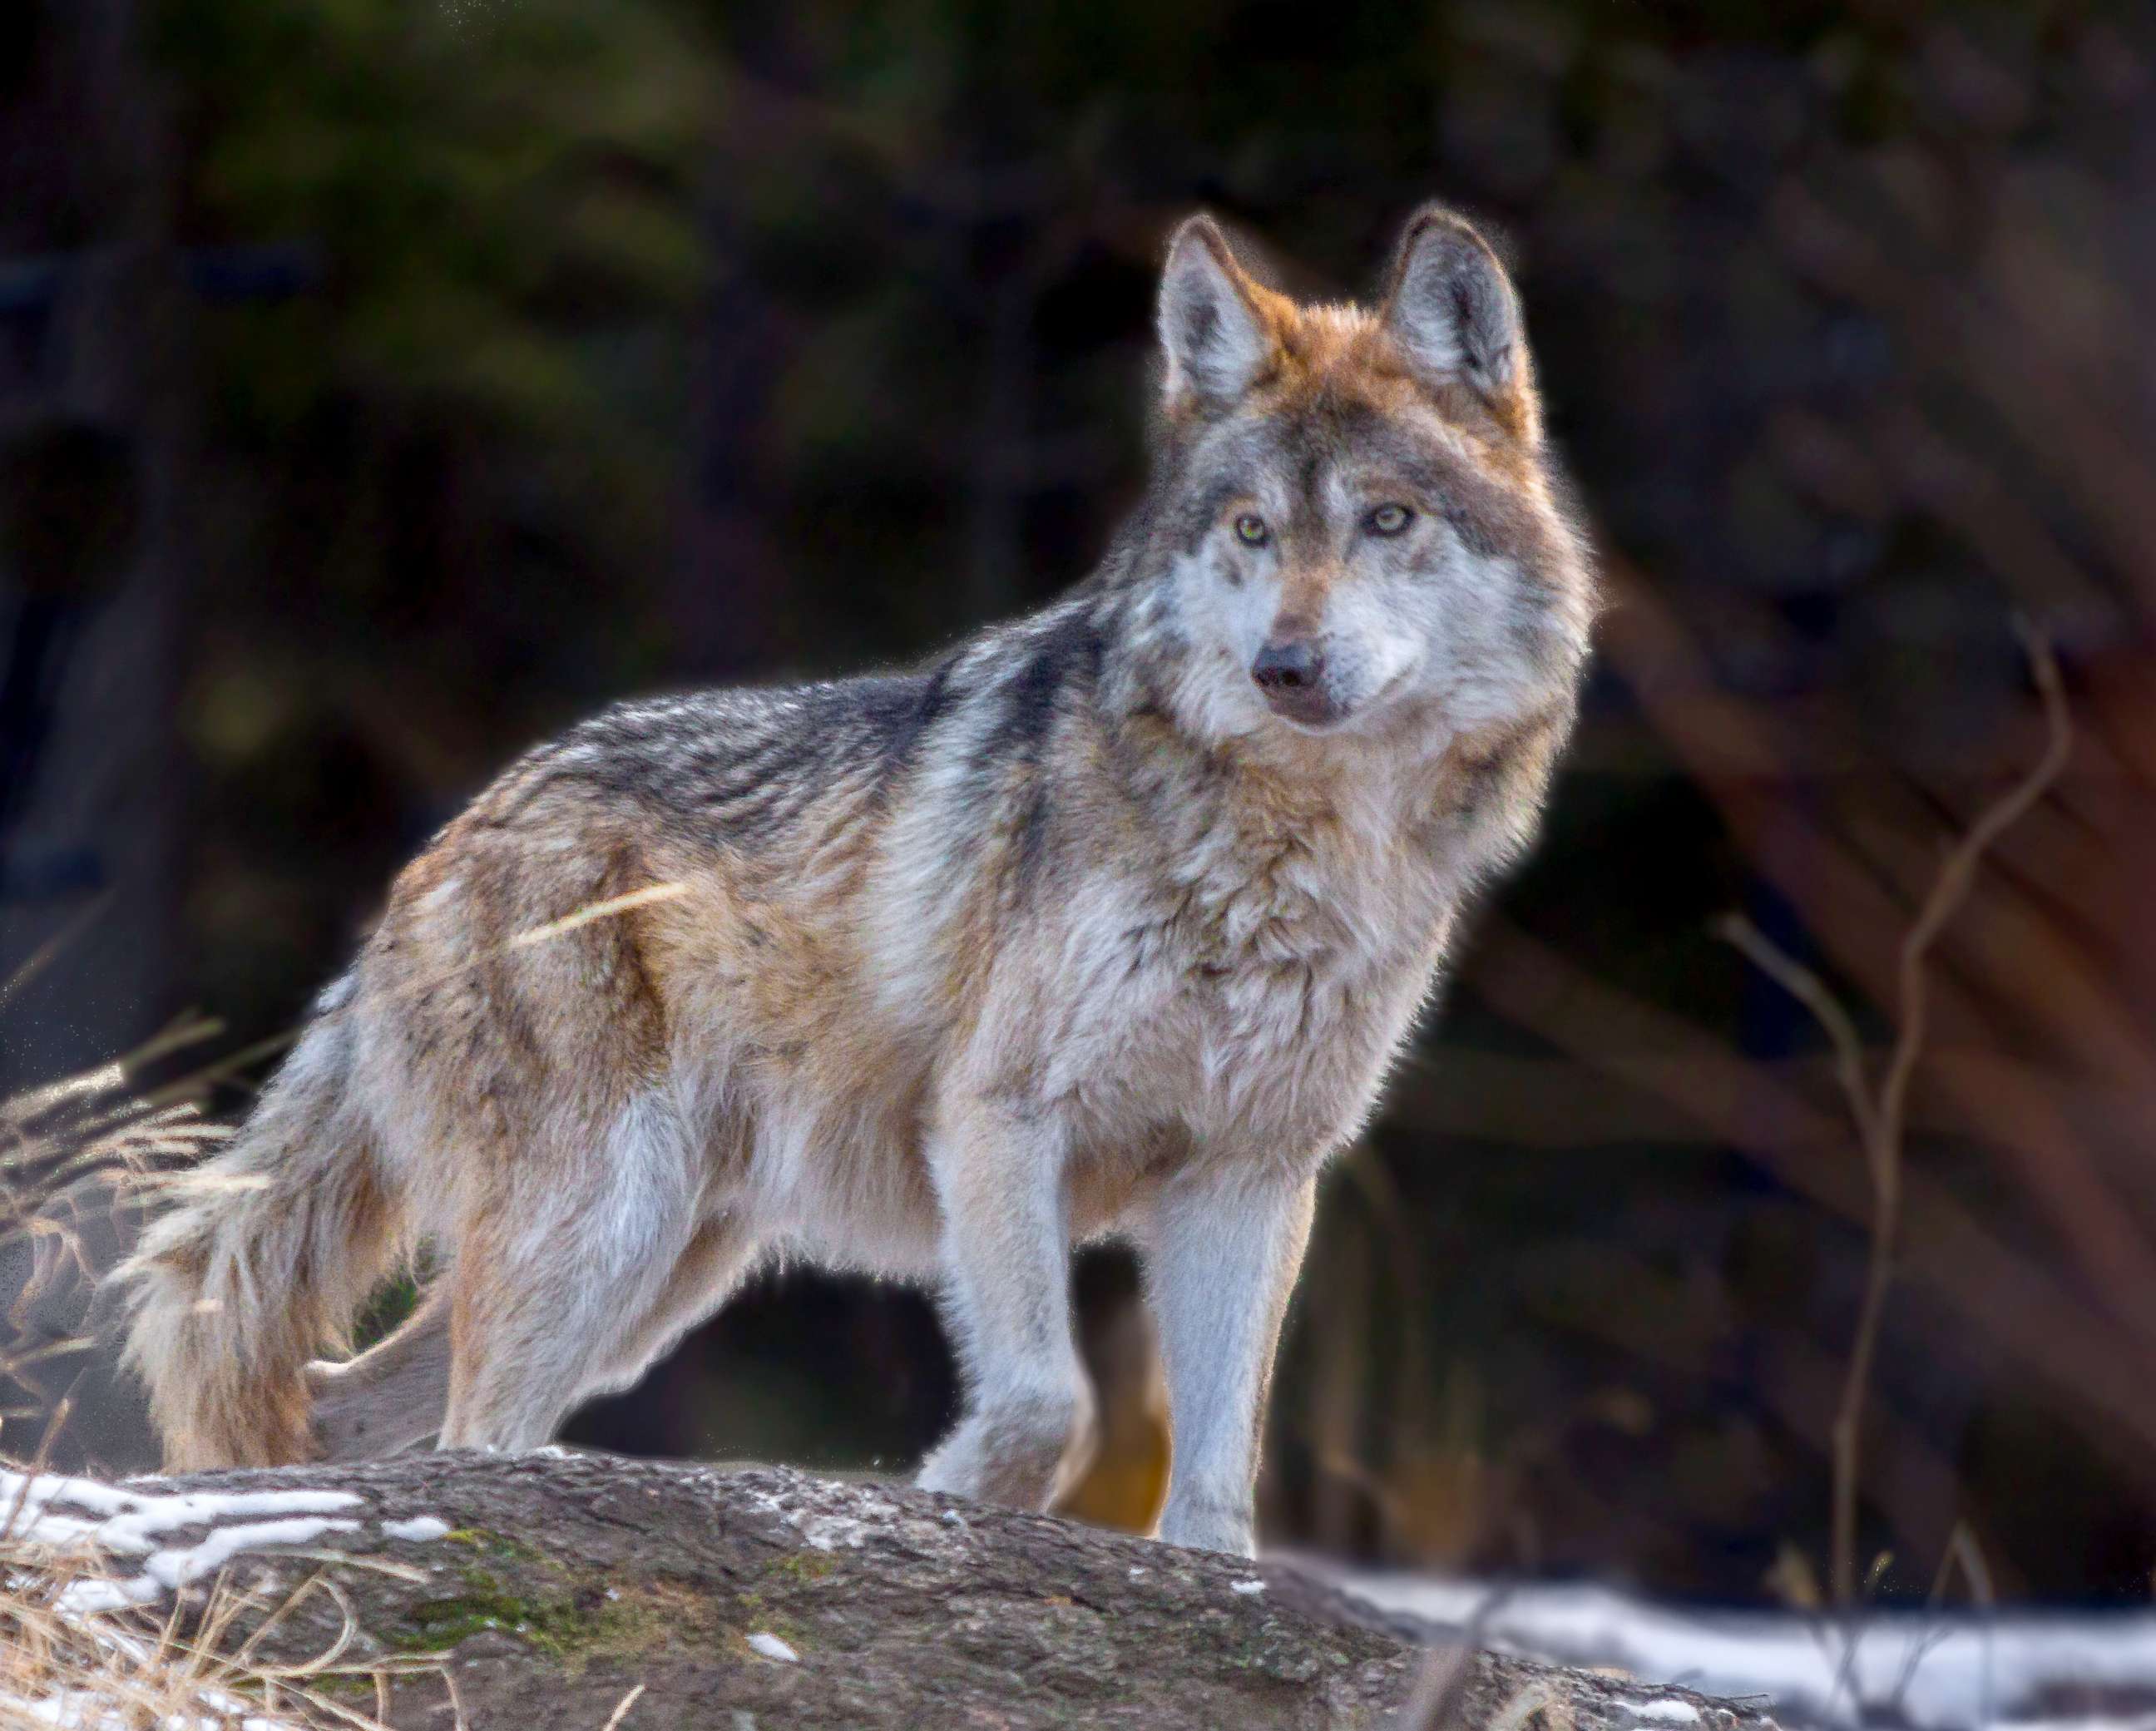 States versus feds: Mexican gray wolf at center of endangered species  debate - ABC News